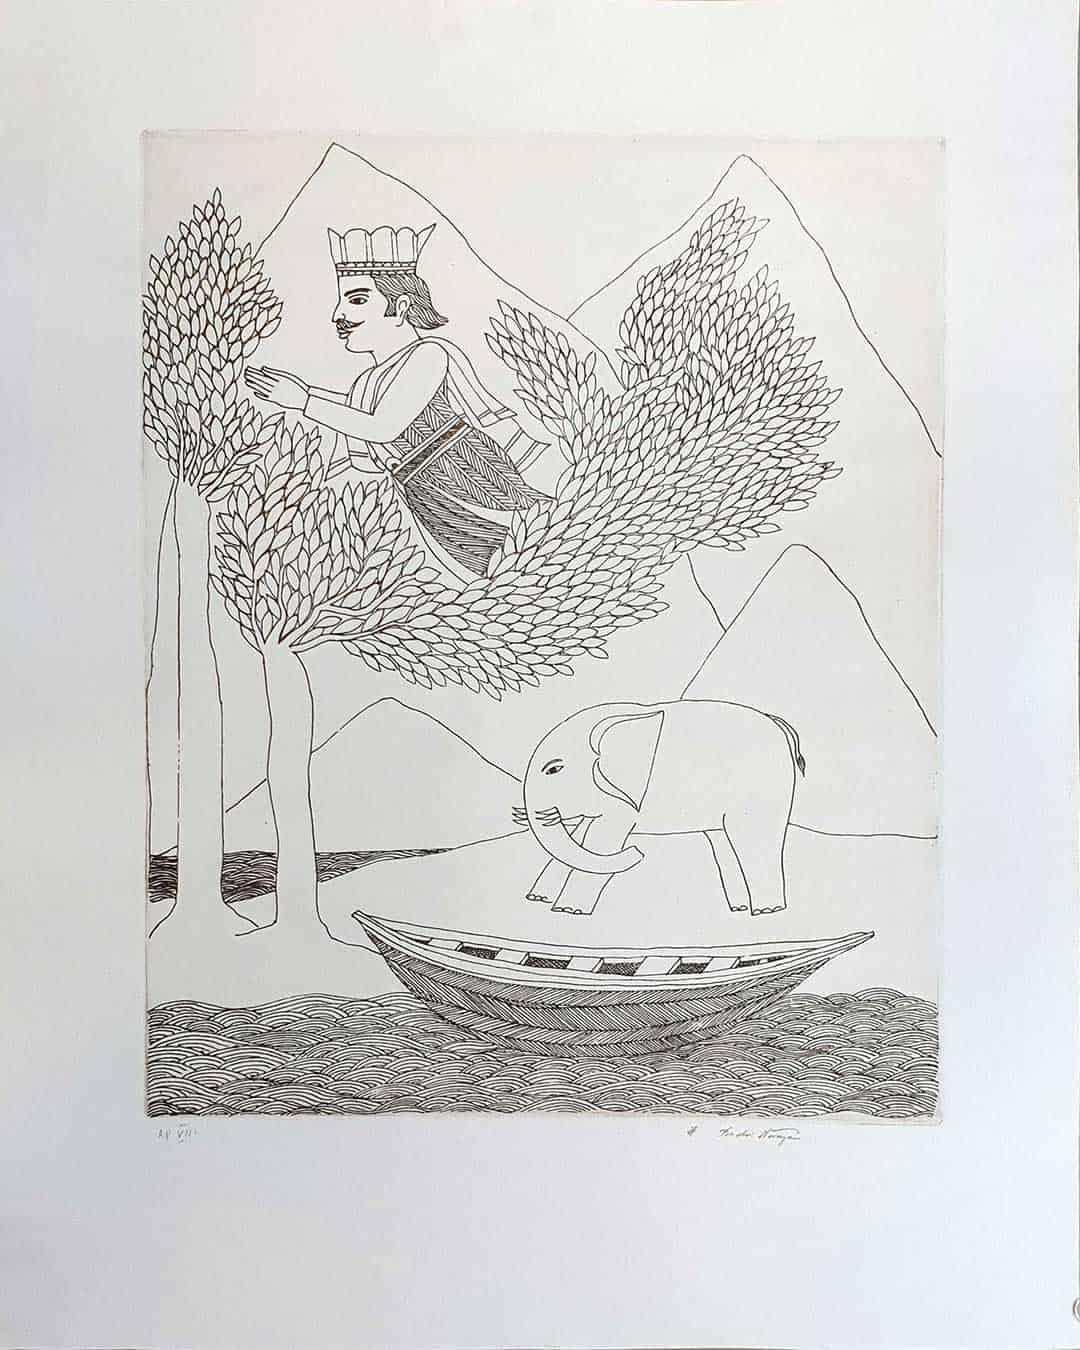 Badri Narayan Figurative Art - King, Elephant, Boat, Trees, Etching on paper by Master Indian Artist "In Stock"